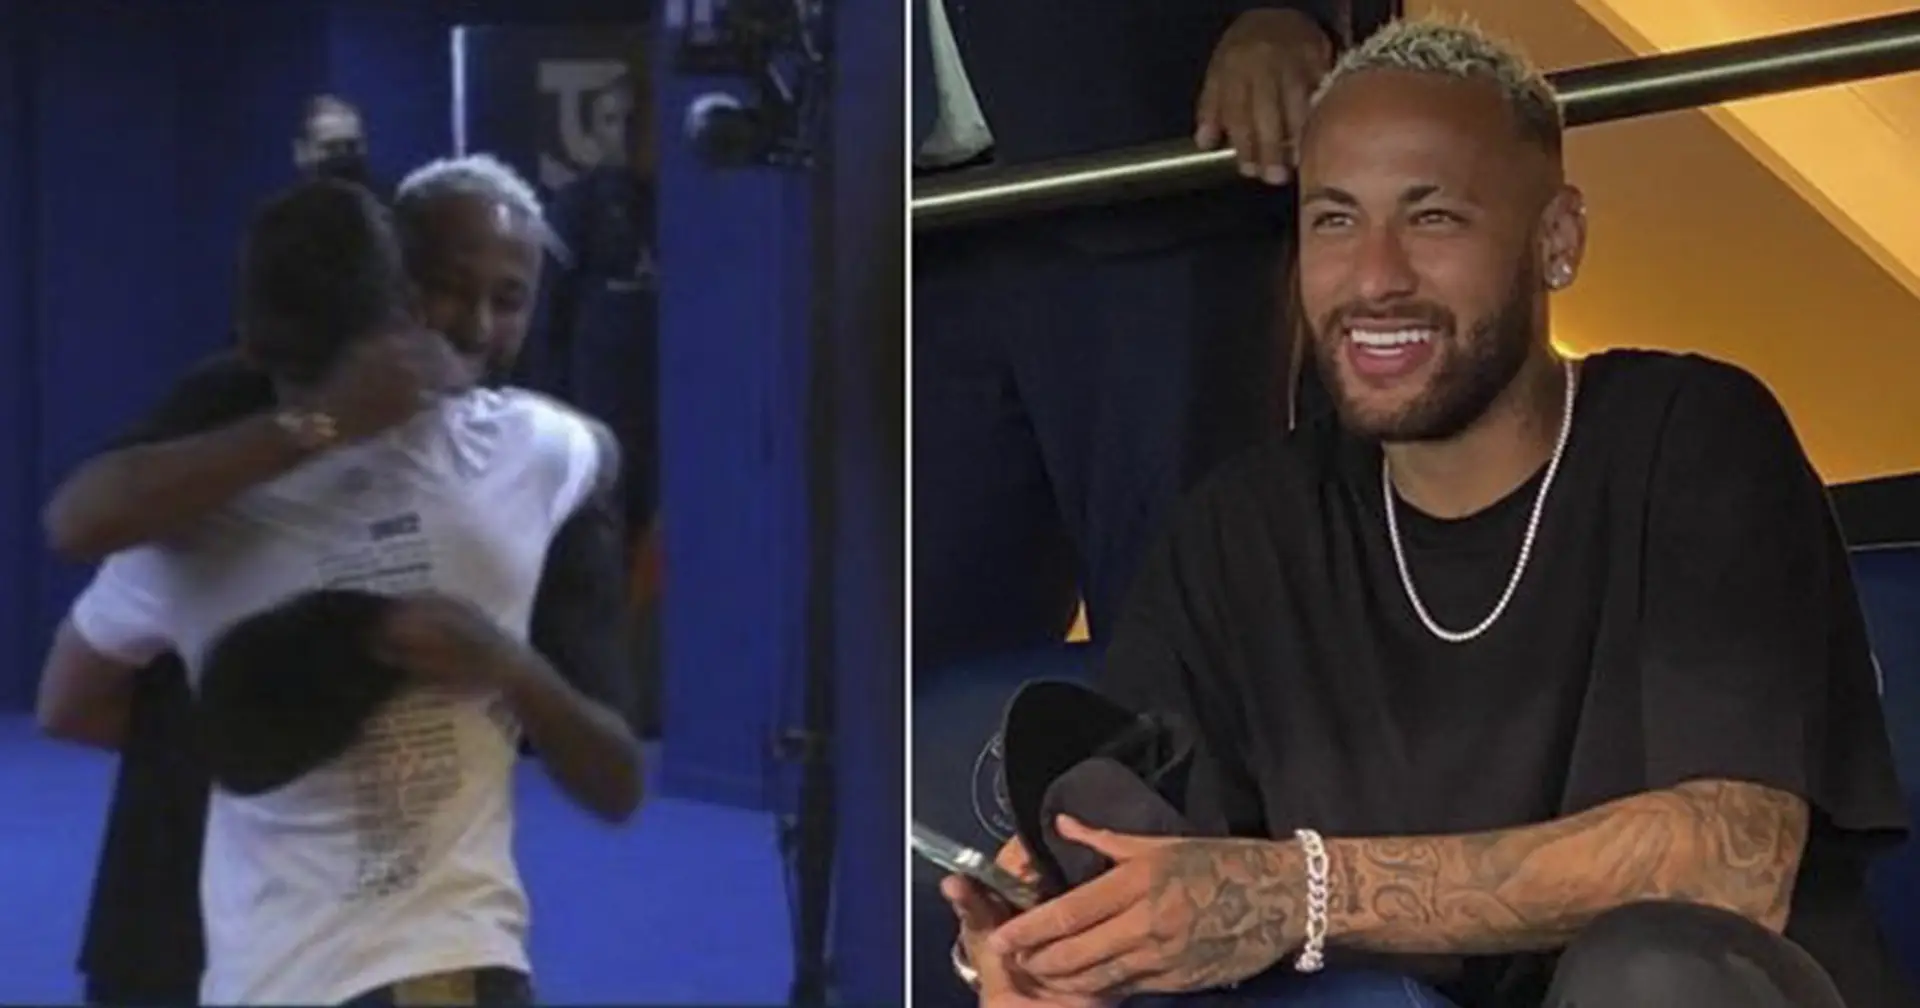 Neymar looks on in awe as Messi gets unveiled to PSG fans, backstage hug caught on camera